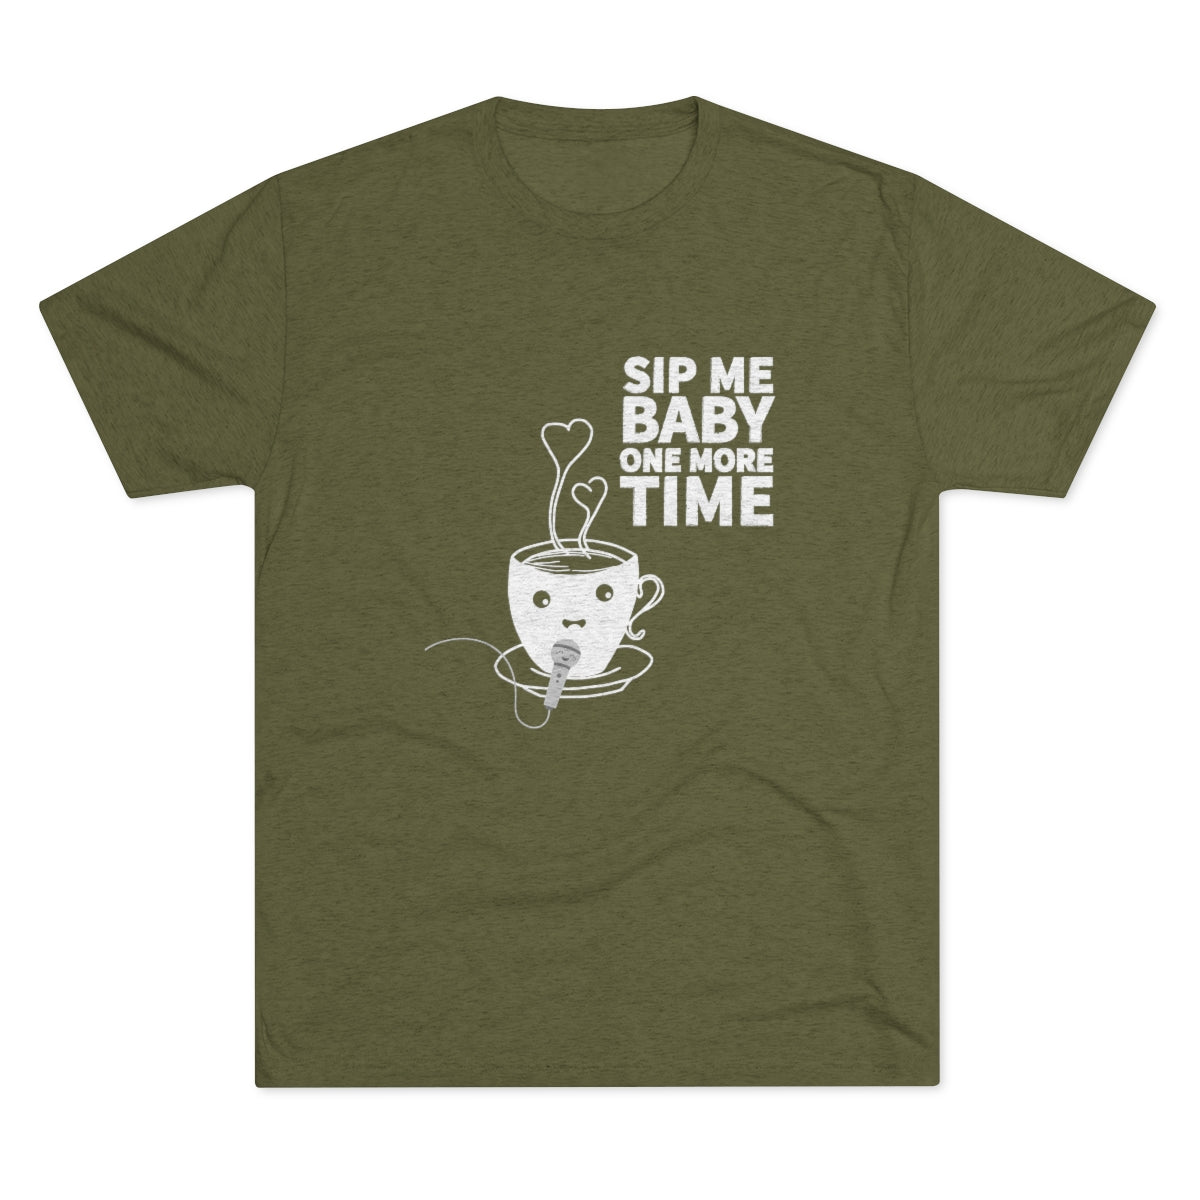 Sip Me Baby Graphic Tee - Tri-Blend Military Green S - Harney & Sons Fine Teas